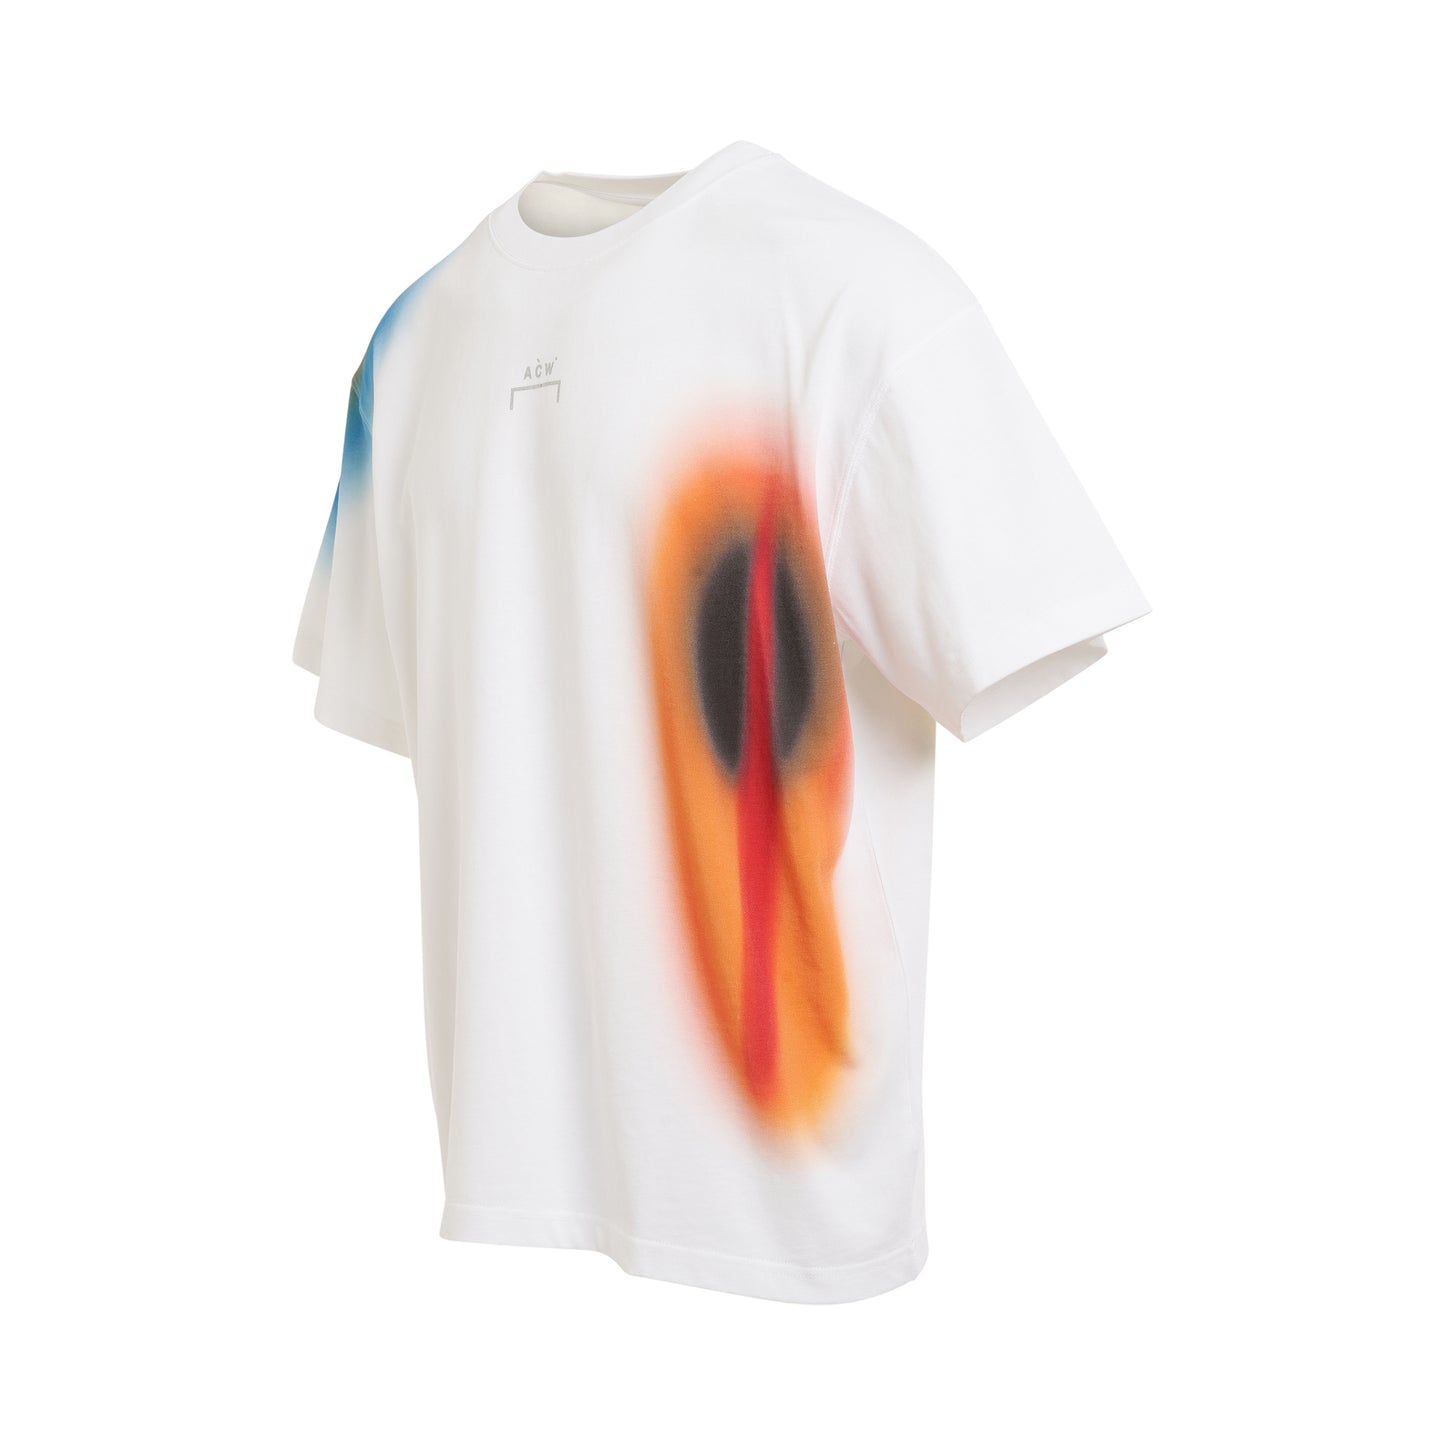 Hypergraphic S/S T-Shirt in White